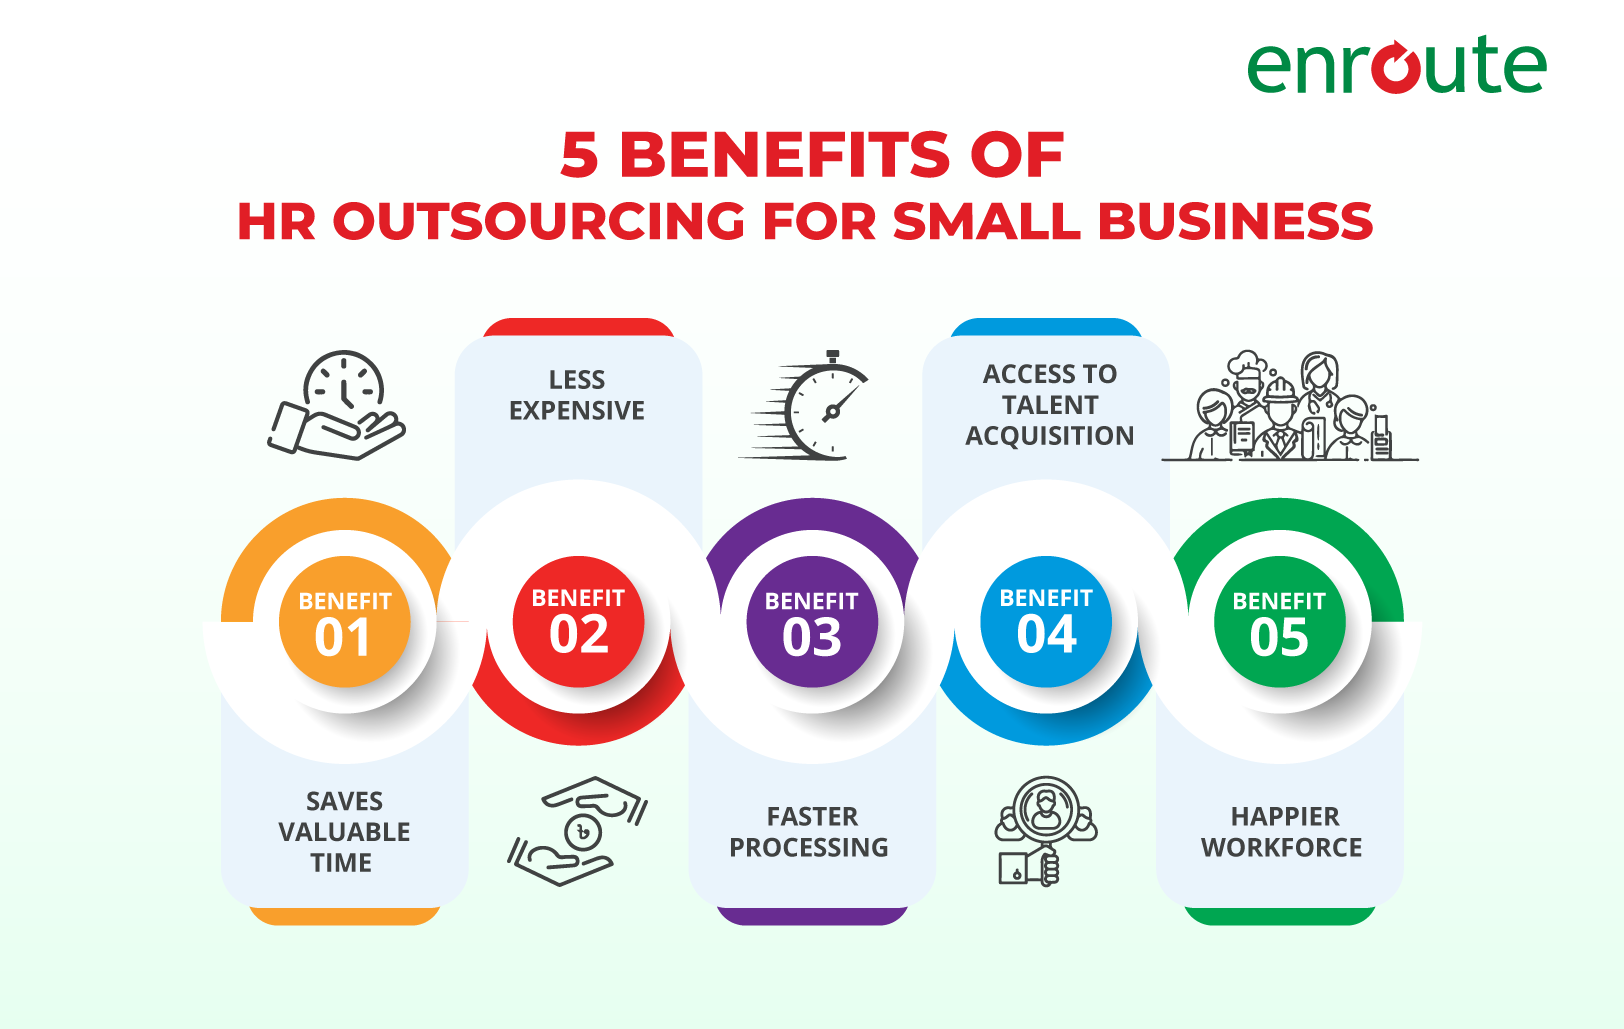 Benefits of HR Outsourcing for Small Business